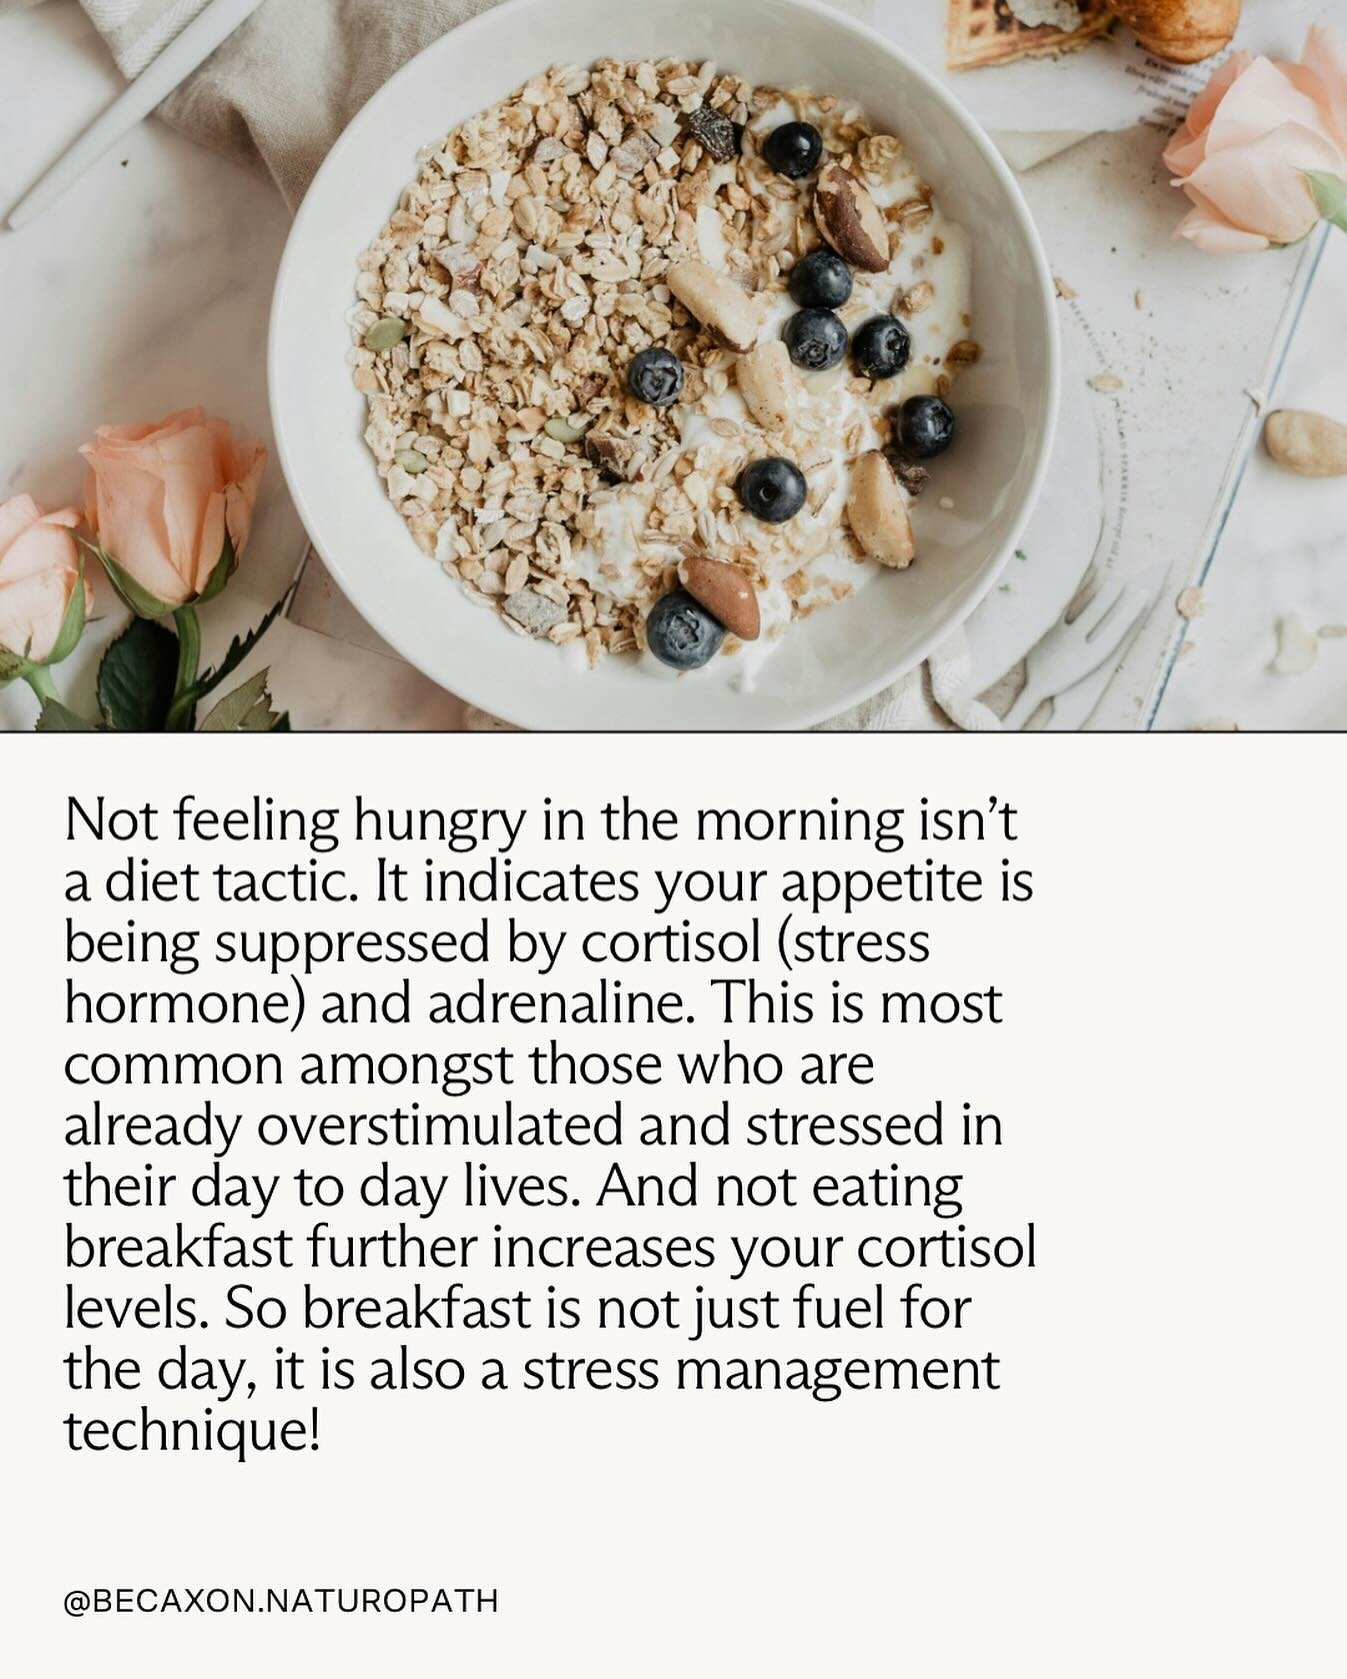 Not feeling hungry in the morning is not a diet technique! It indicates to me that your appetite is being suppressed by cortisol (stress hormone) and adrenaline. This is most common amongst those who are already overstimulated and stressed in their d